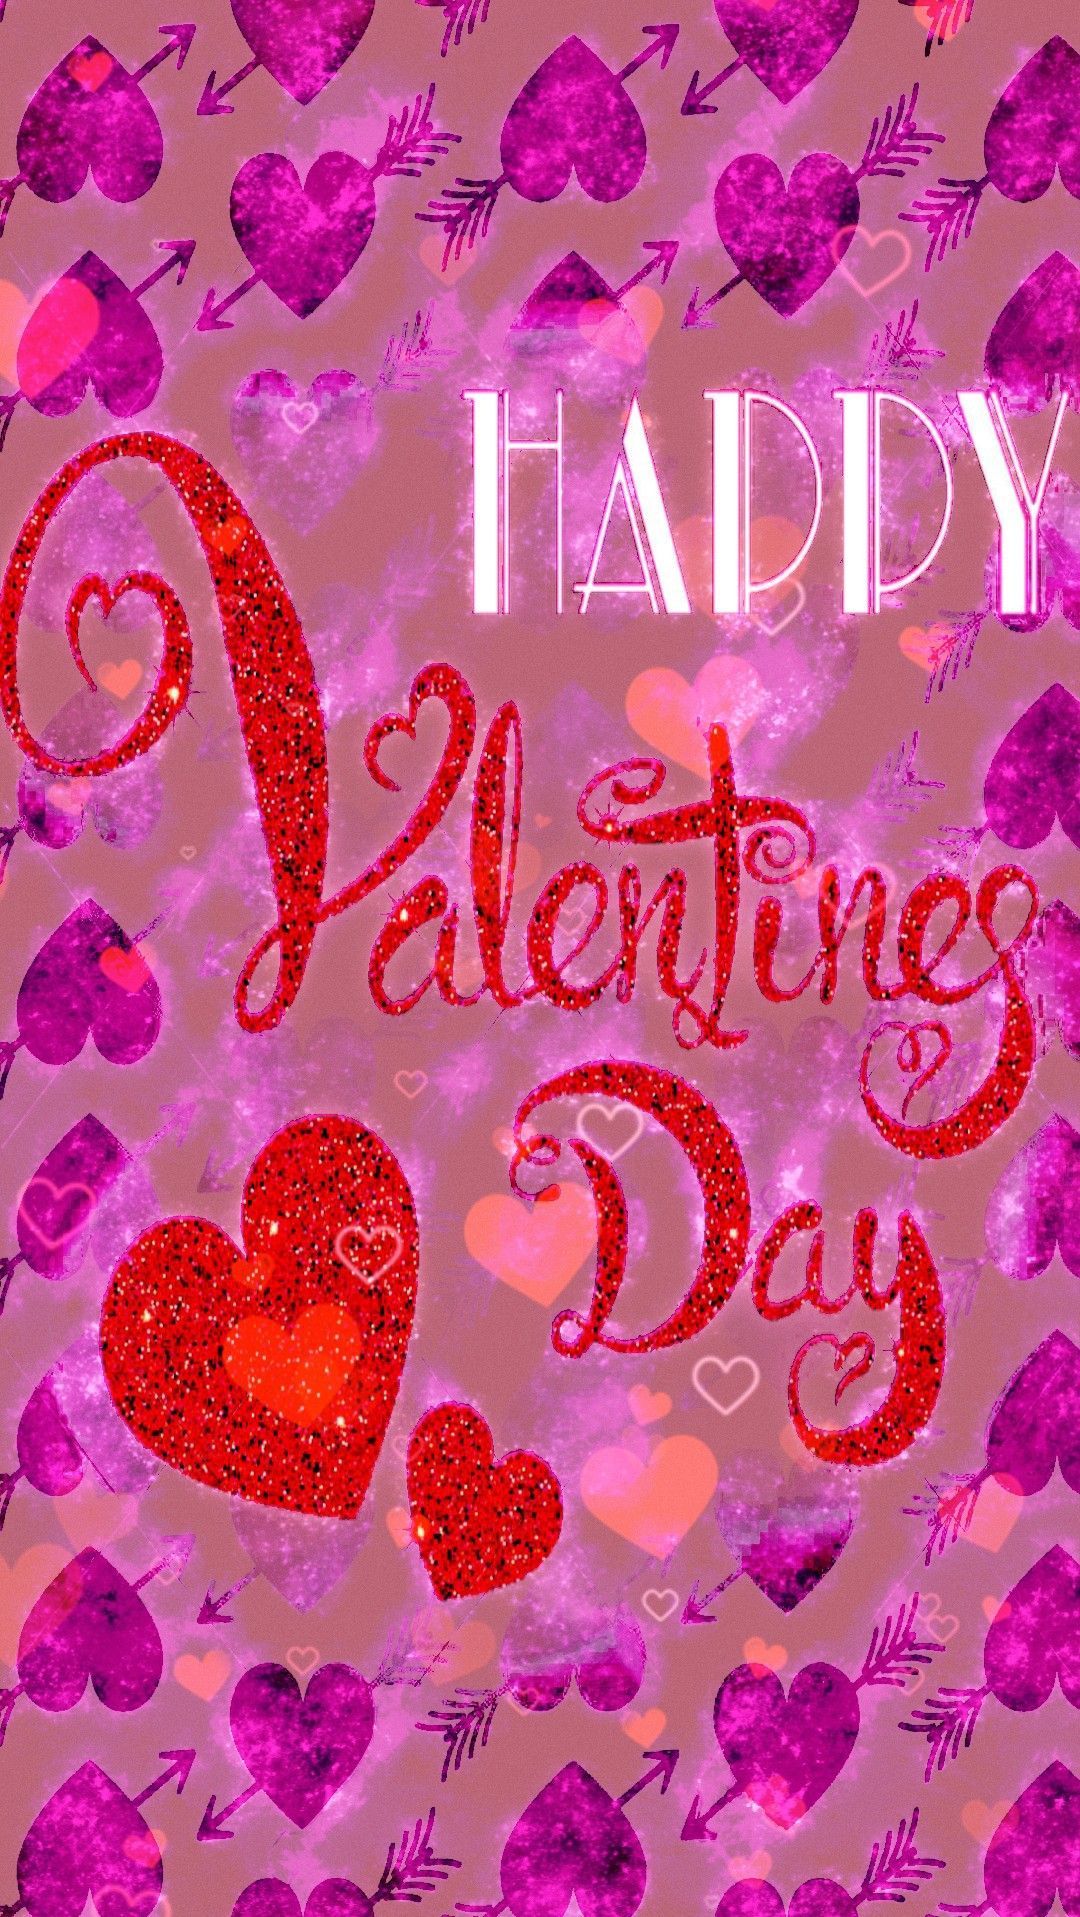 Happy Valentine's Day, made by me #patterns #hearts #love #bemine #cupidhearts #iloveyou #re. Valentines wallpaper, Pink chevron wallpaper, Heart iphone wallpaper